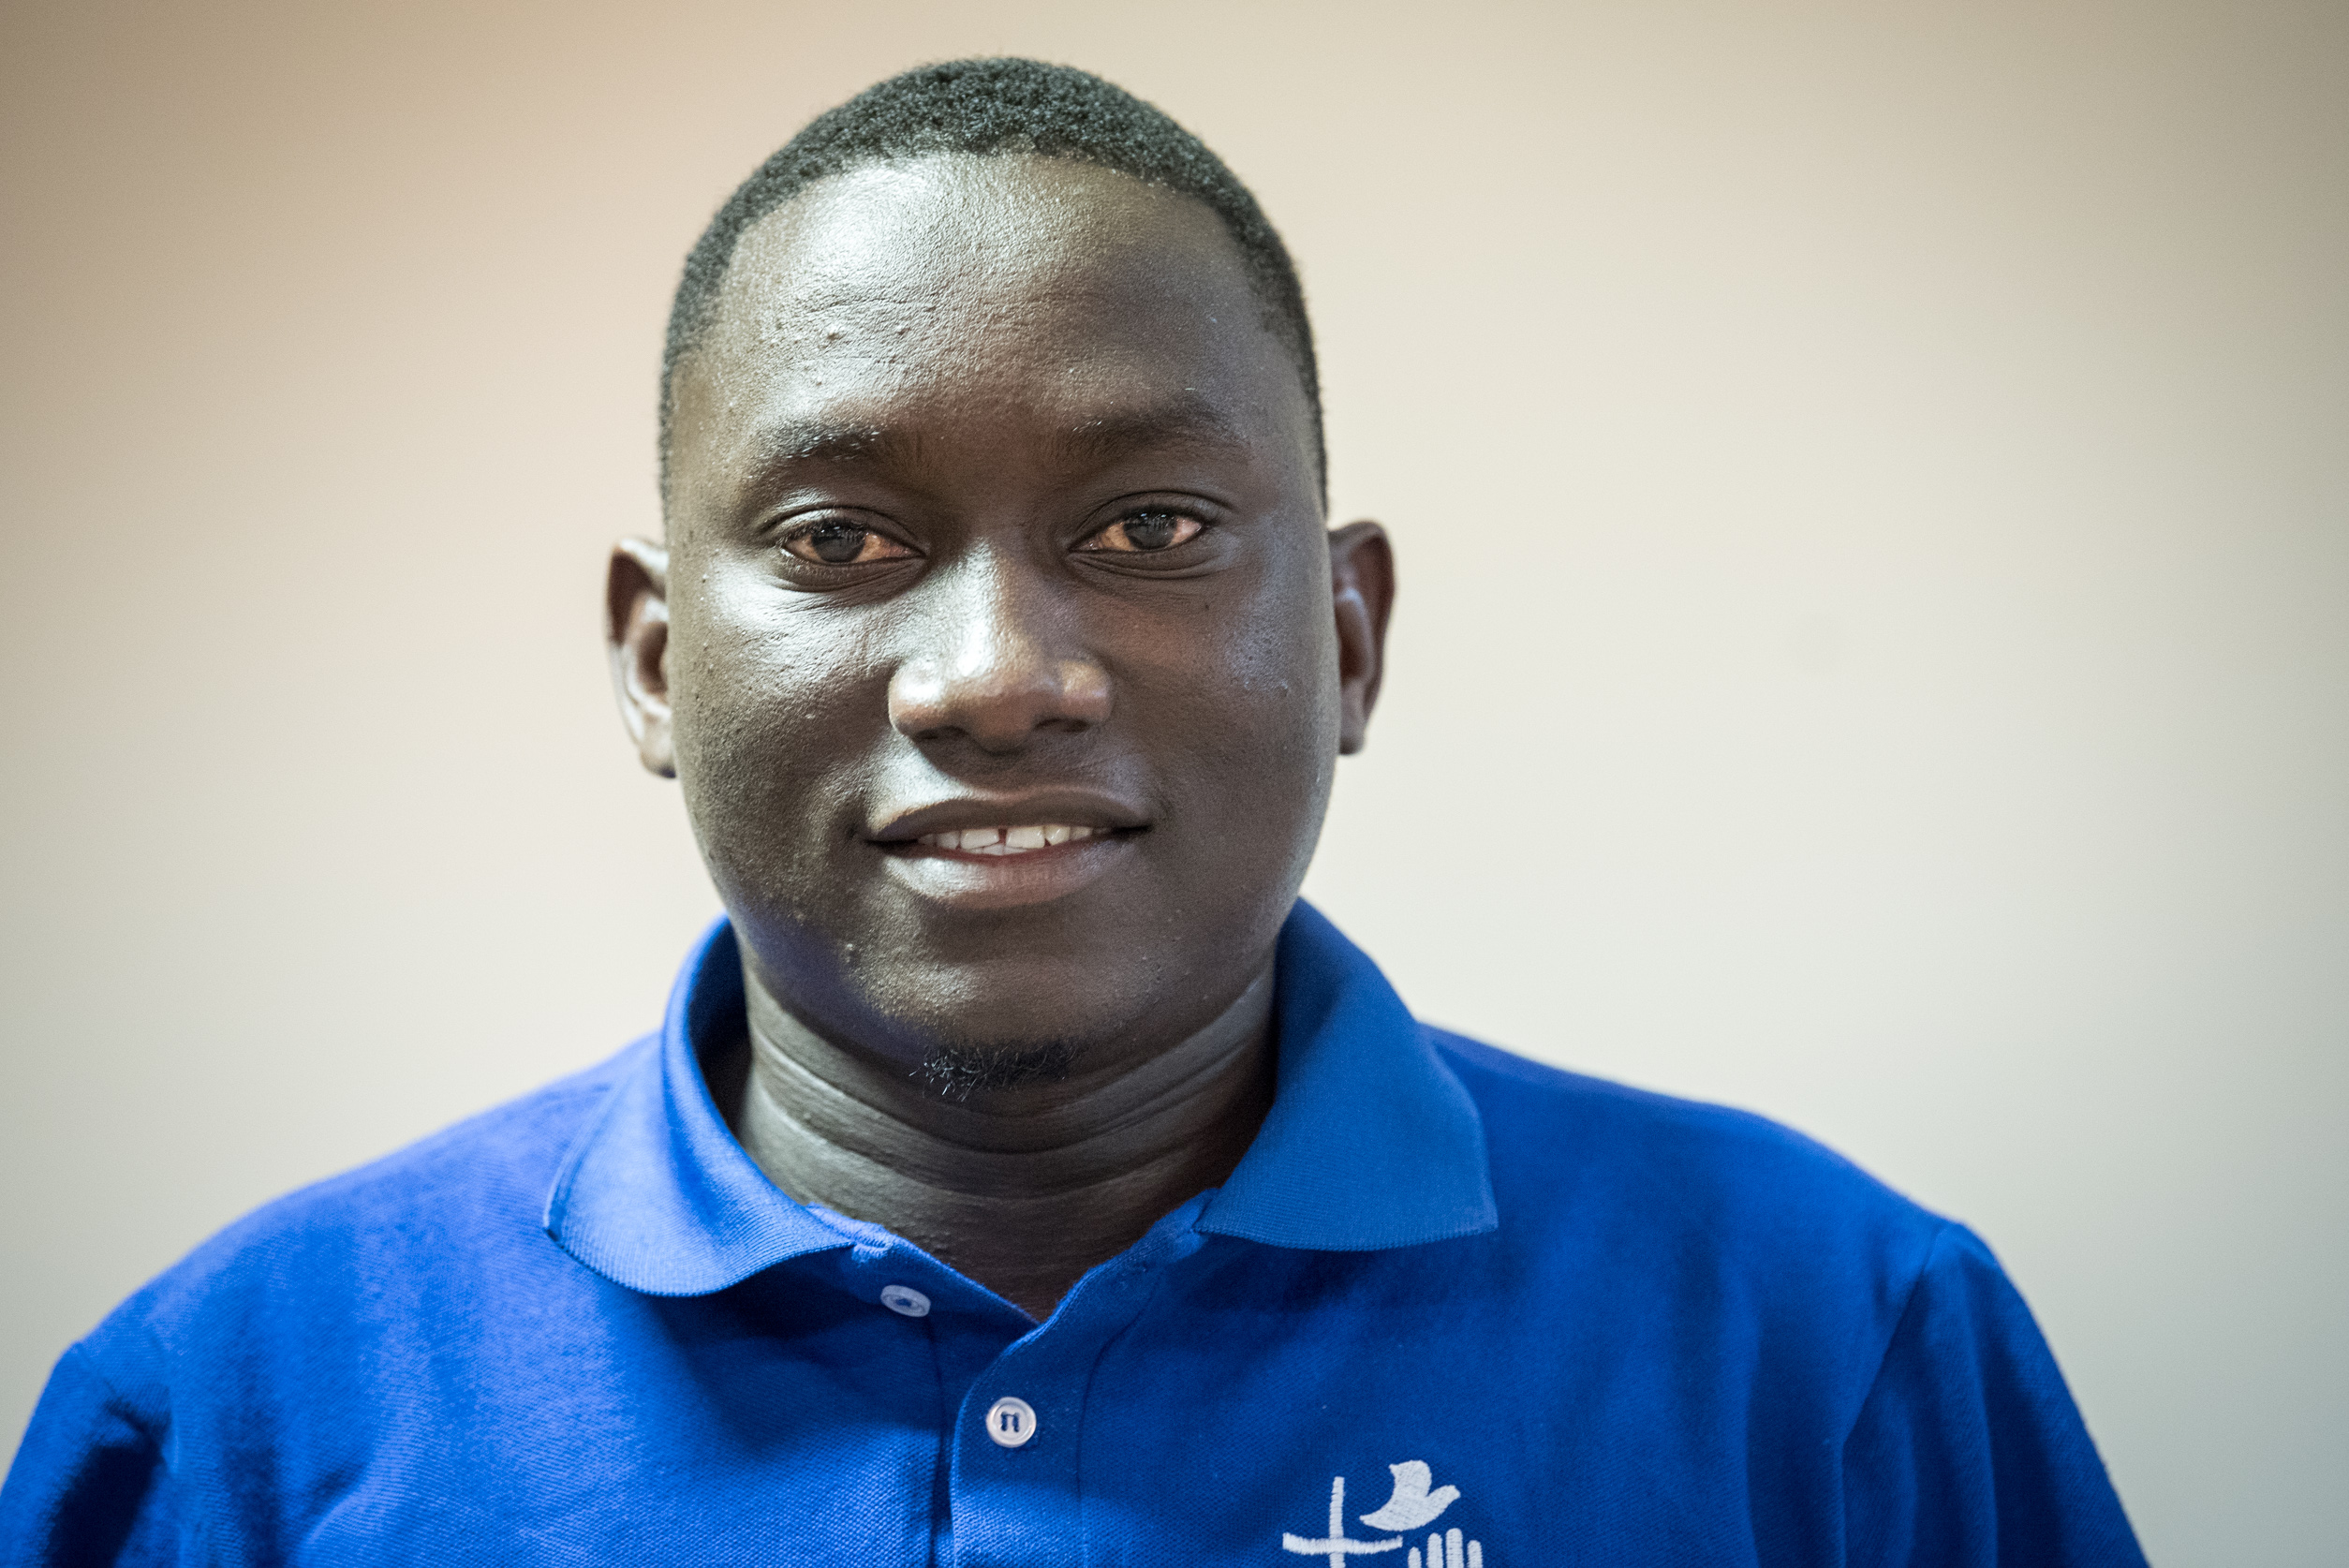 Titus Aukongo from the Evangelical Lutheran Church in Namibia, a volunteer at the Lutheran World Federation's Twelfth Assembly. Photo: LWF/Albin Hillert